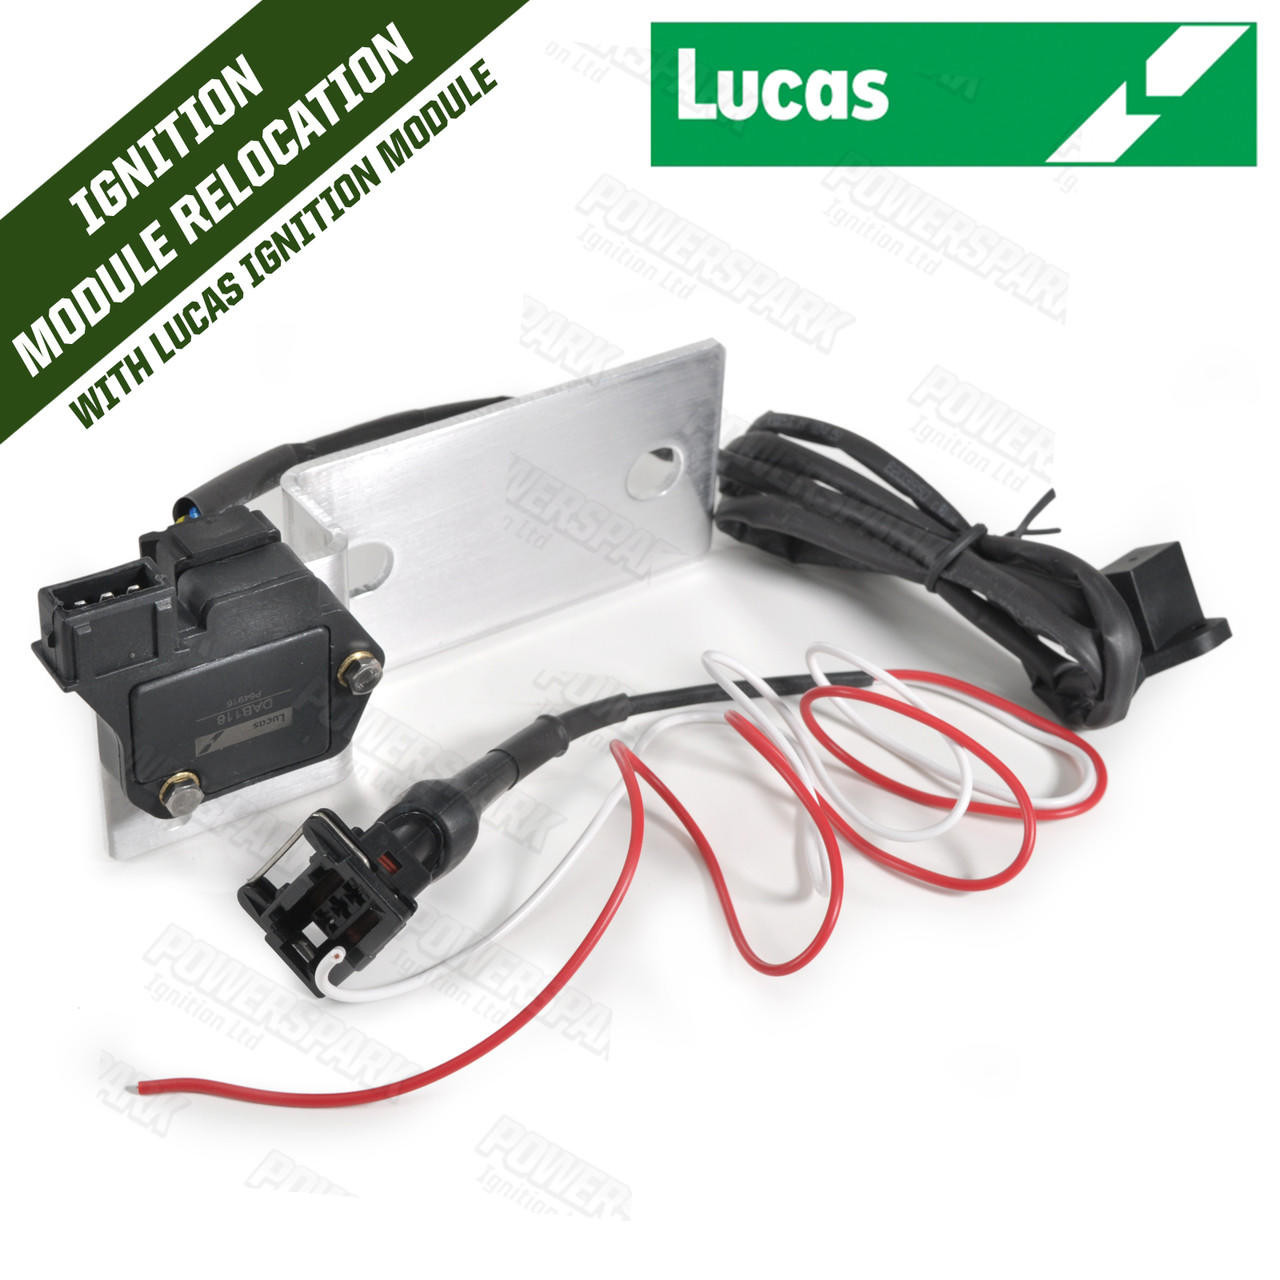 Lucas Powerspark Ignition V8 Module Relocation Kit including Lucas Module & Harness & 3 Pin Wire